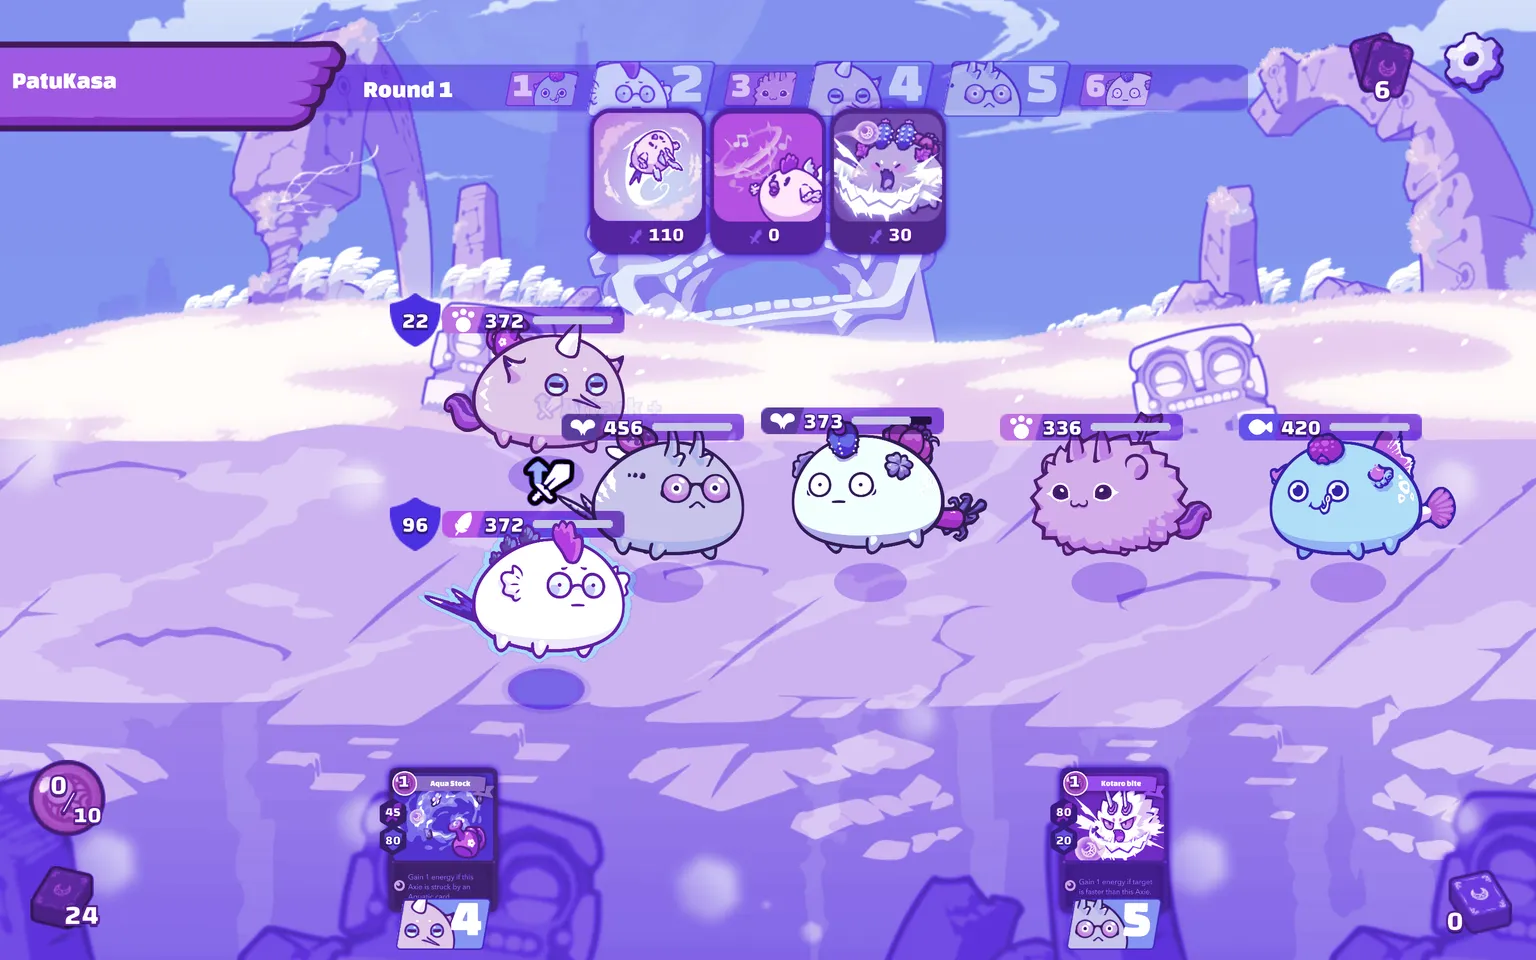 Axie Infinity sees you collect cute monsters to battle with. Image: Axie Infinity